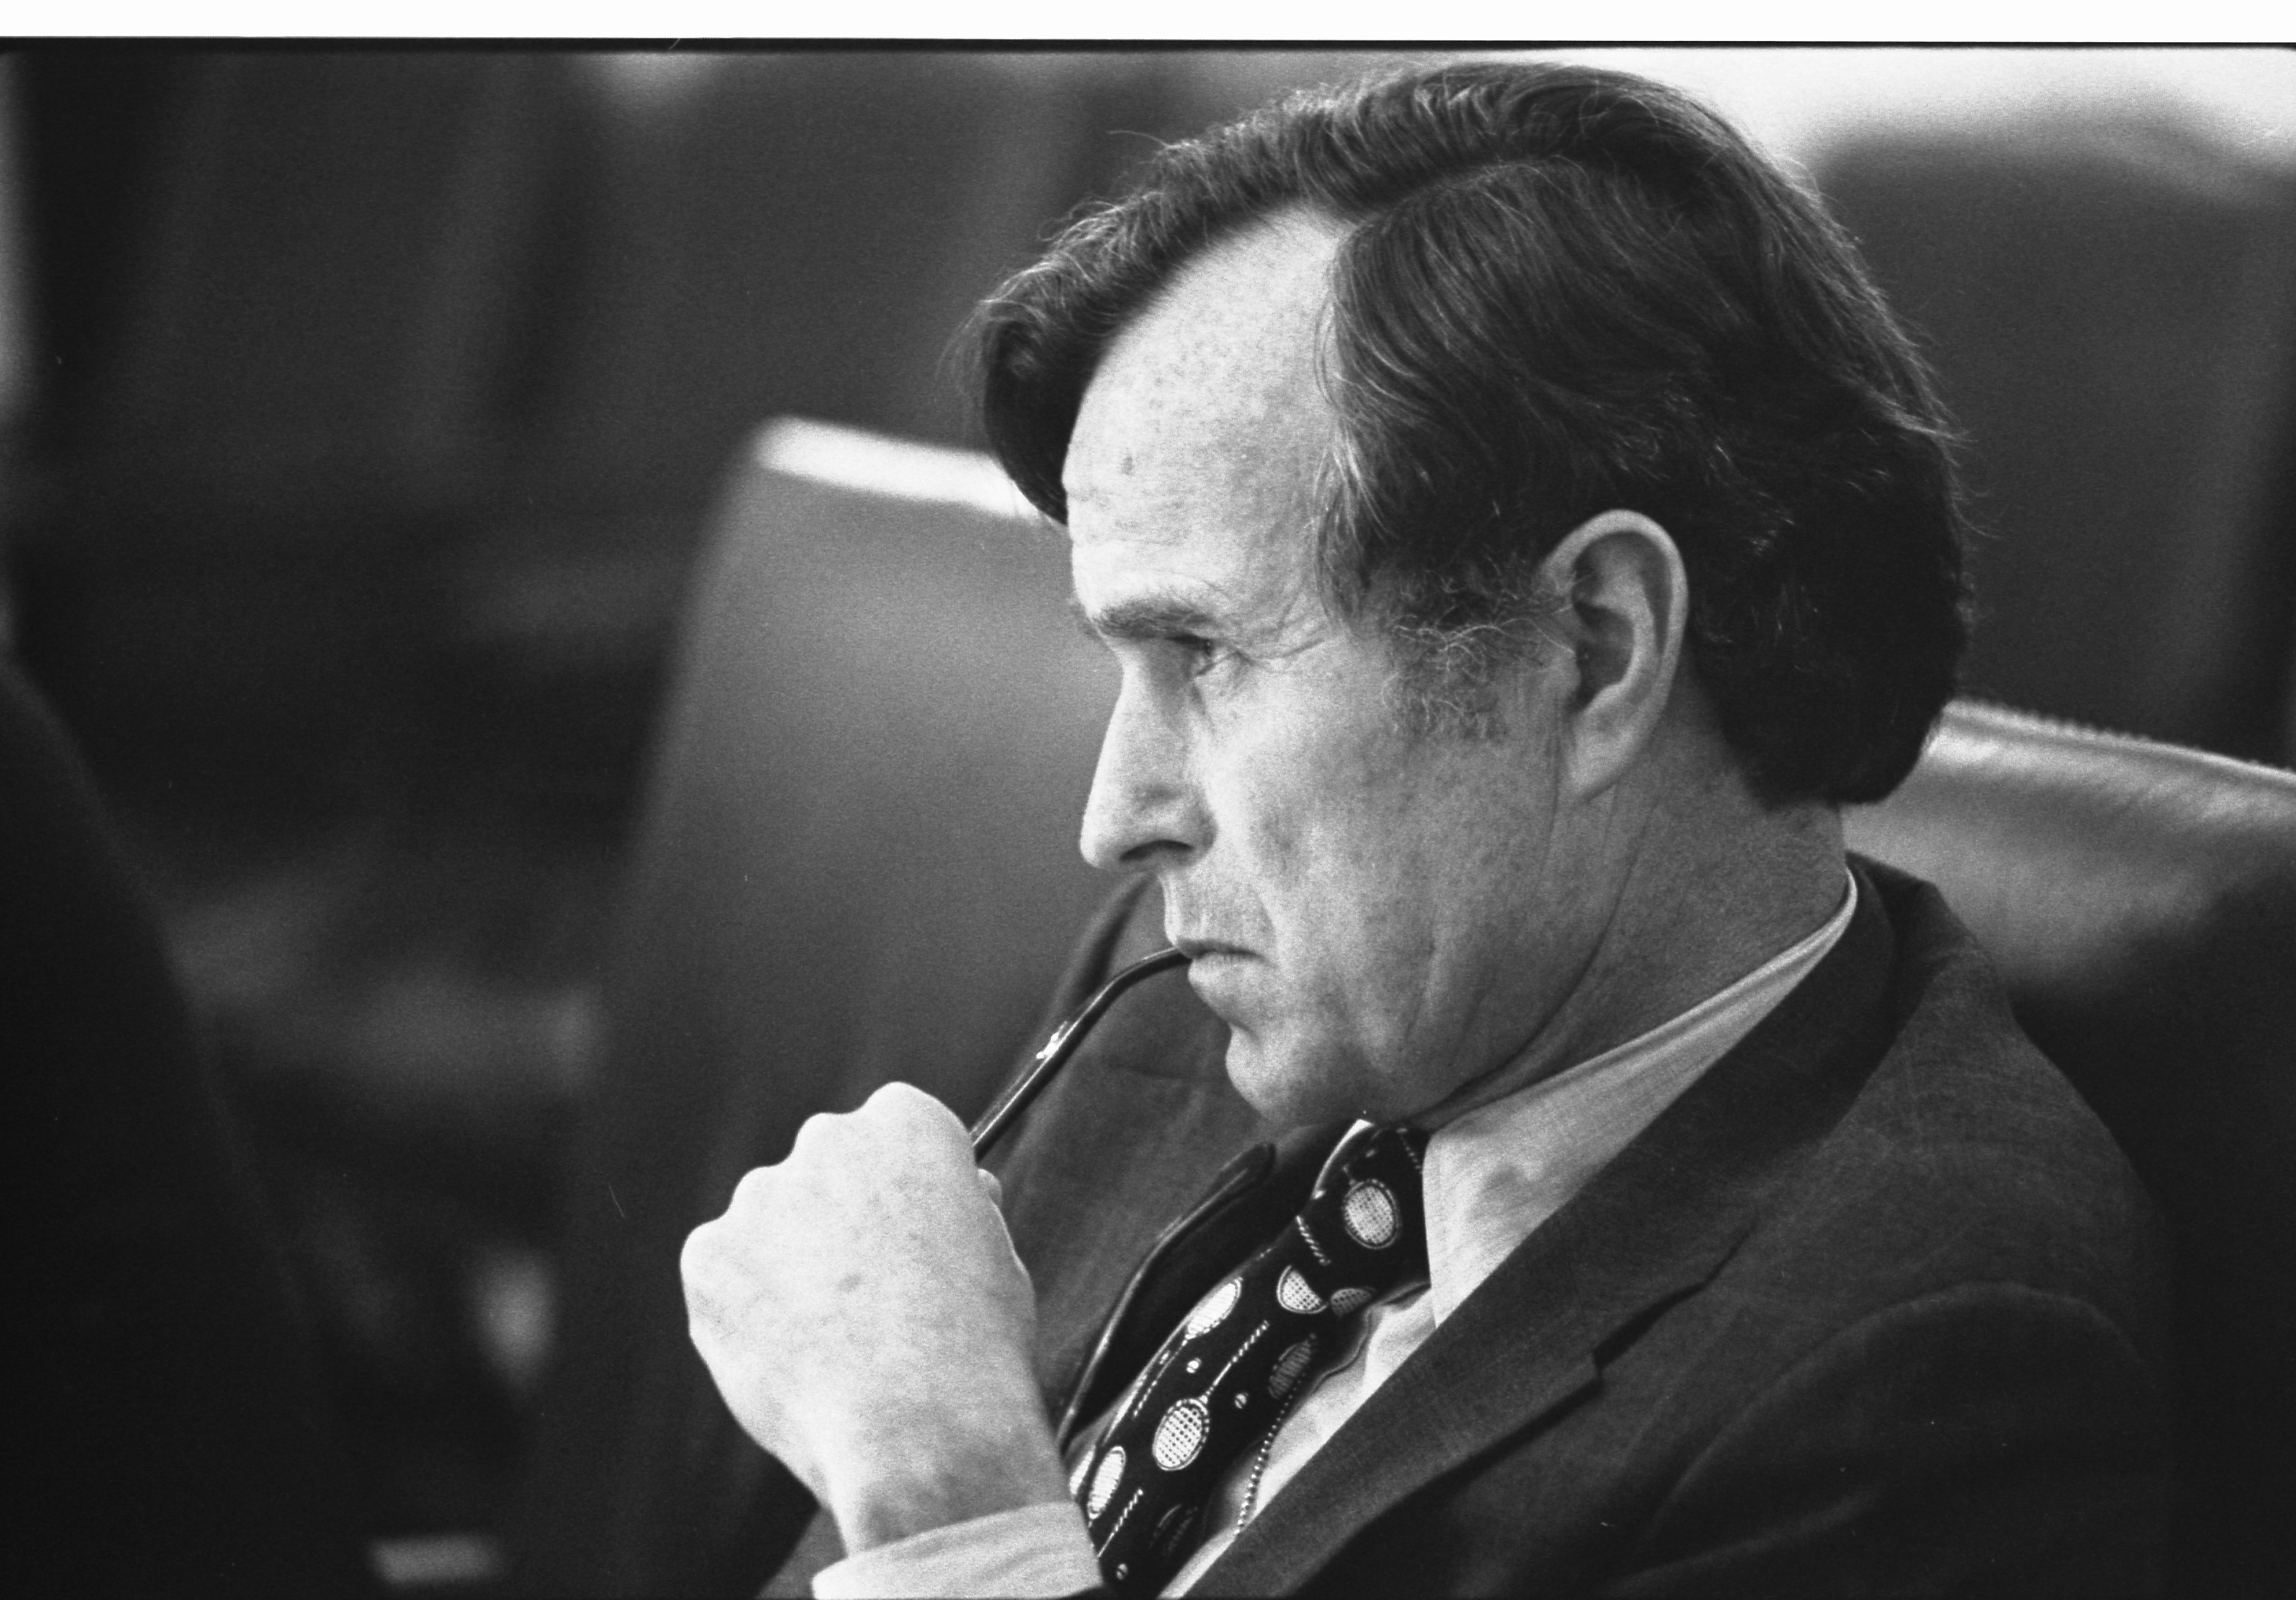 CIA_Director_George_H.W._Bush_listens_at_a_meeting_following_the_assassinations_in_Beirut,_1976_-_NARA_-_7064954